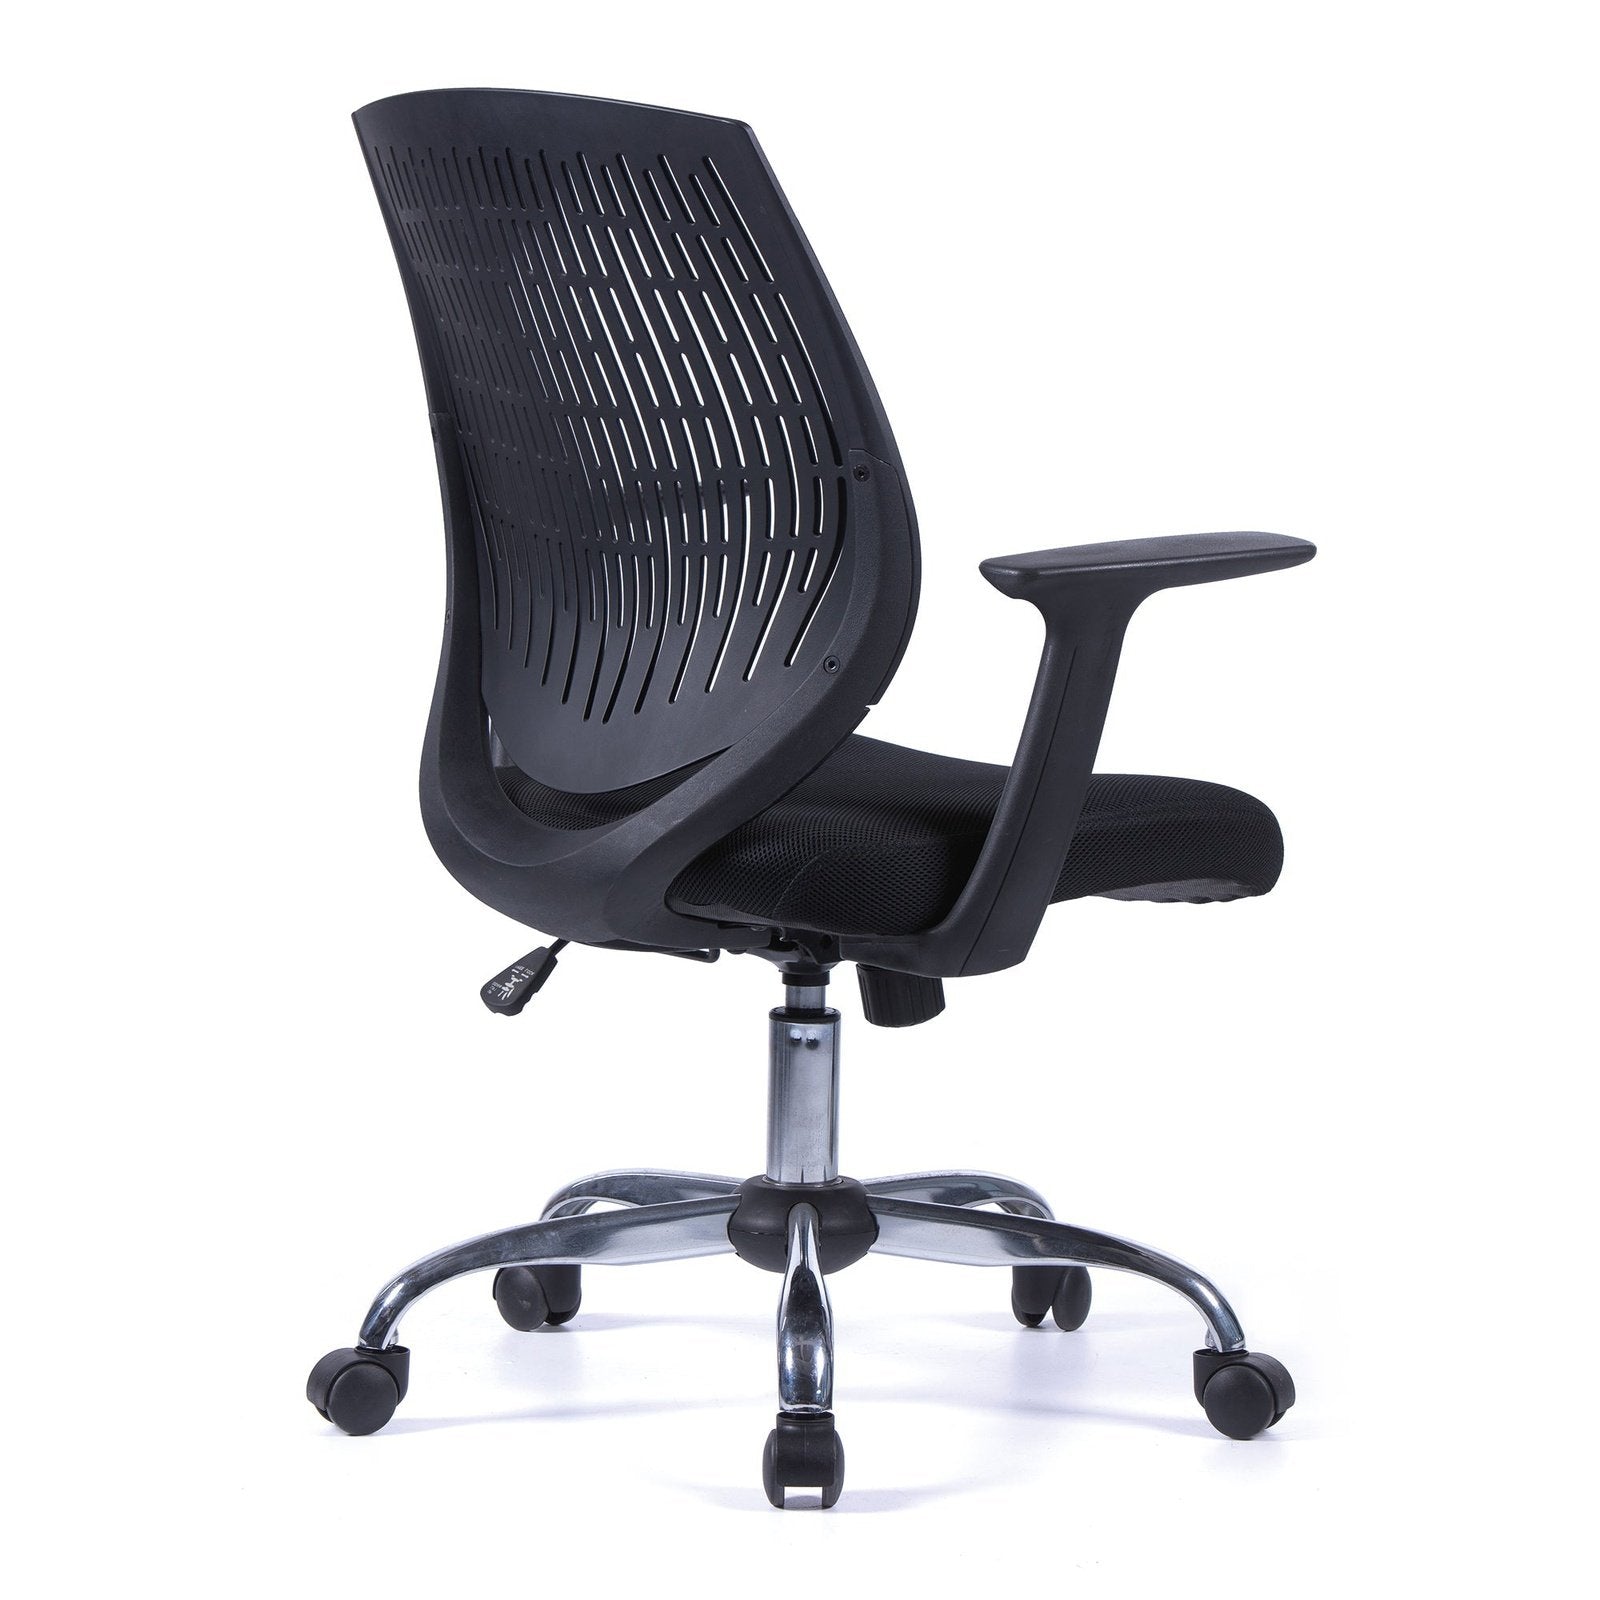 Medium Back Sturdy & Flexible Designer Armchair with Chrome Base - Black - Office Products Online